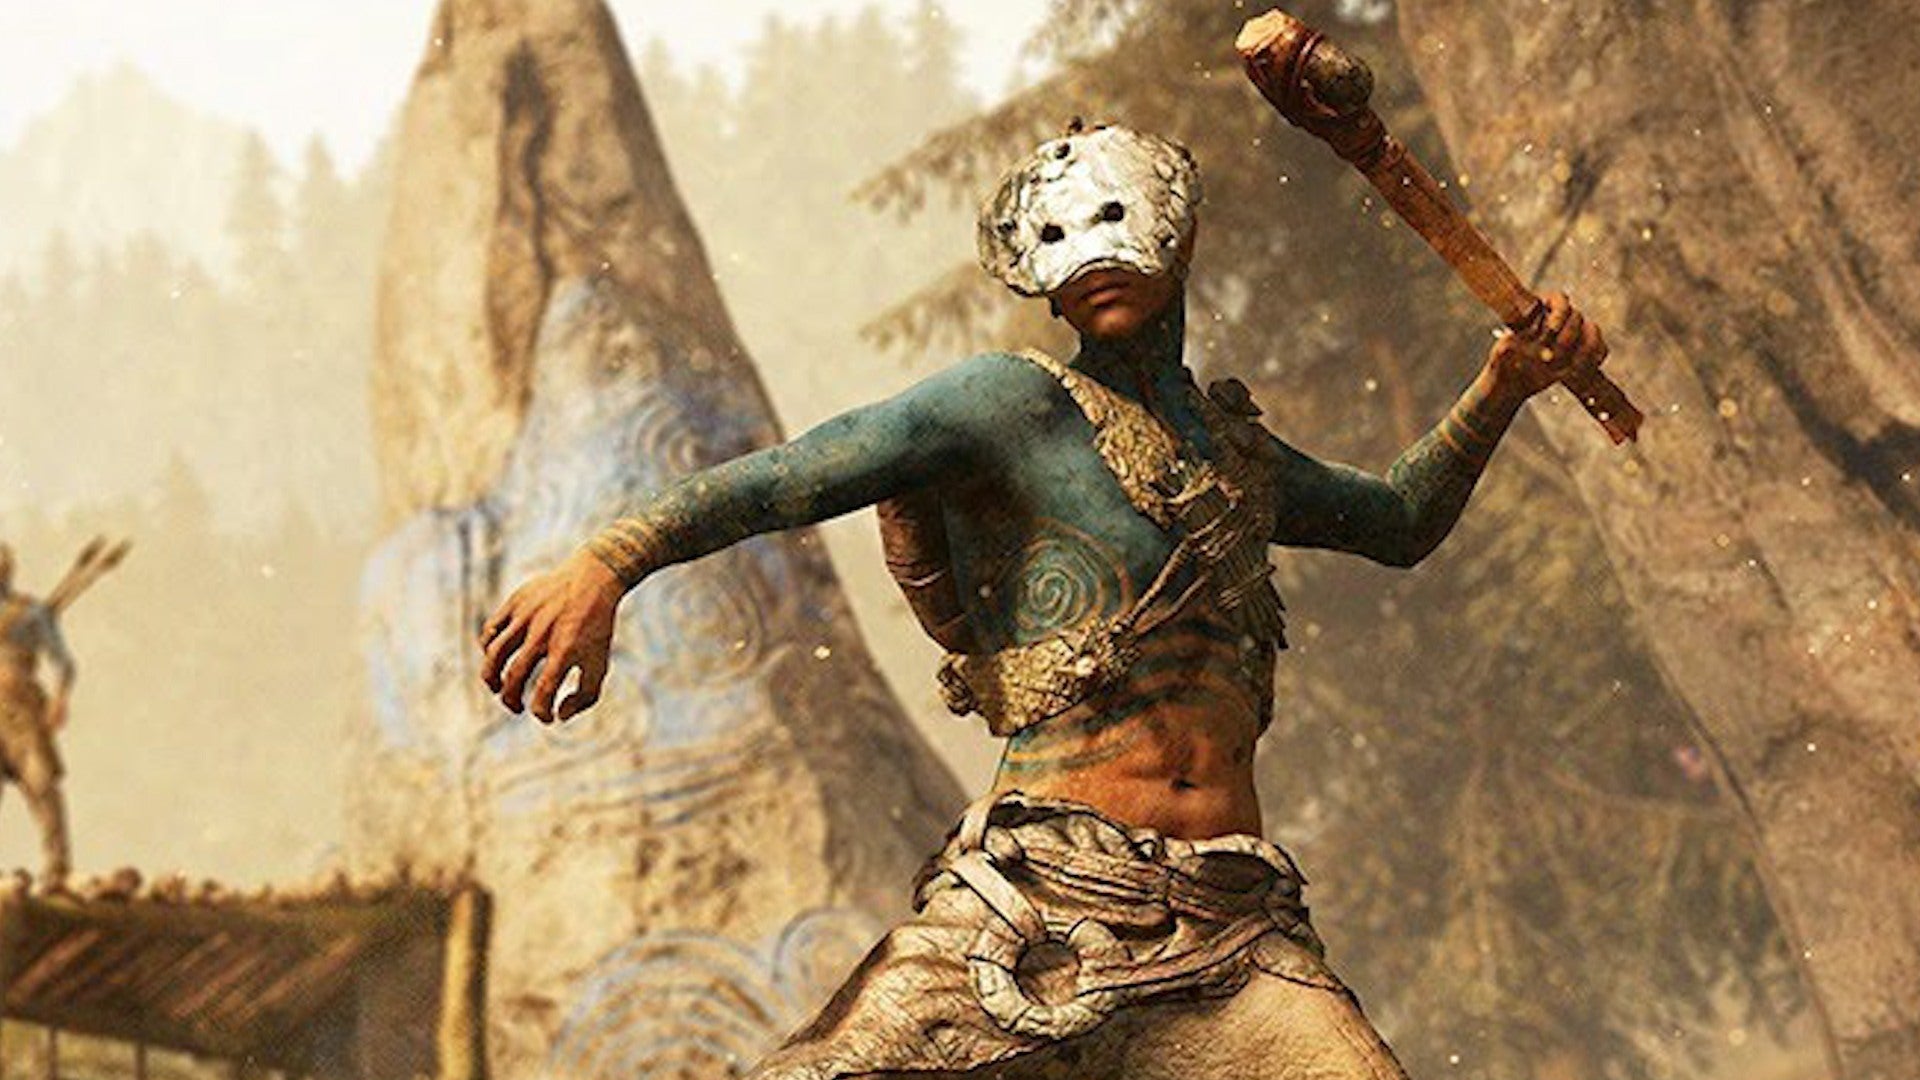 cheats for far cry primal